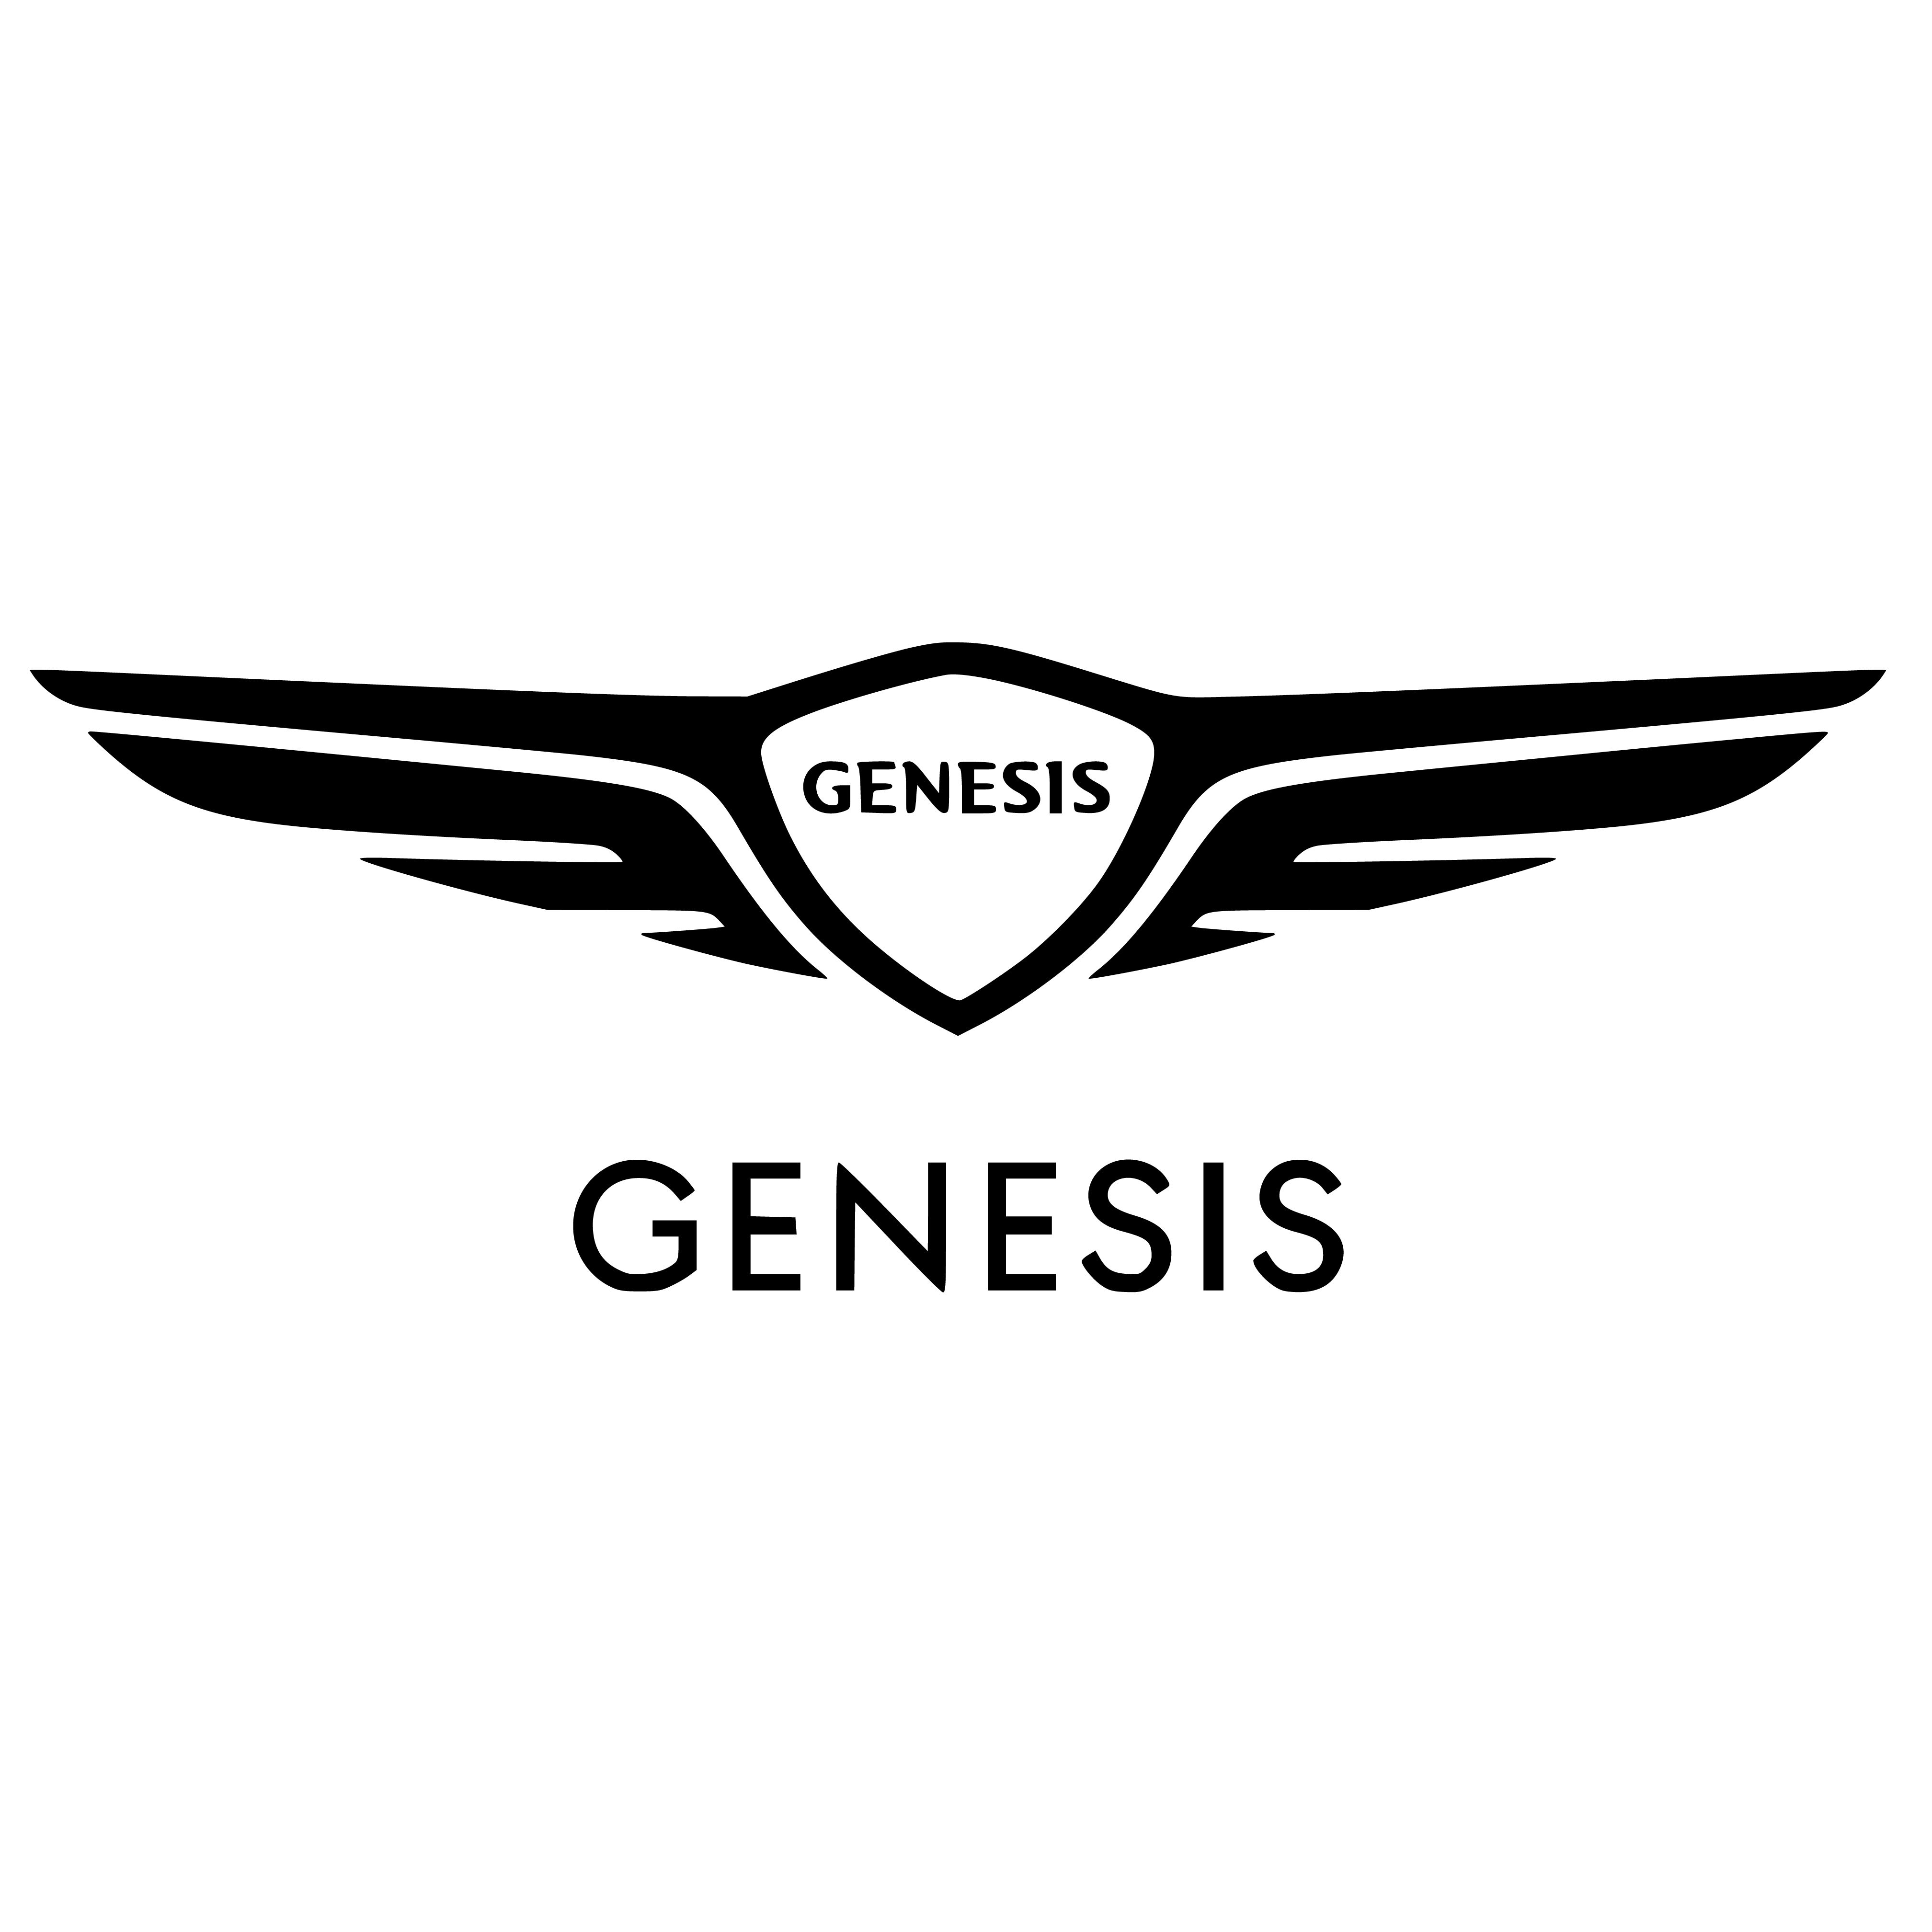 A monochrome logo depicting the word "genesis" flanked by two stylized wings, with a shield shape above the text, also bearing the word "genesis,"